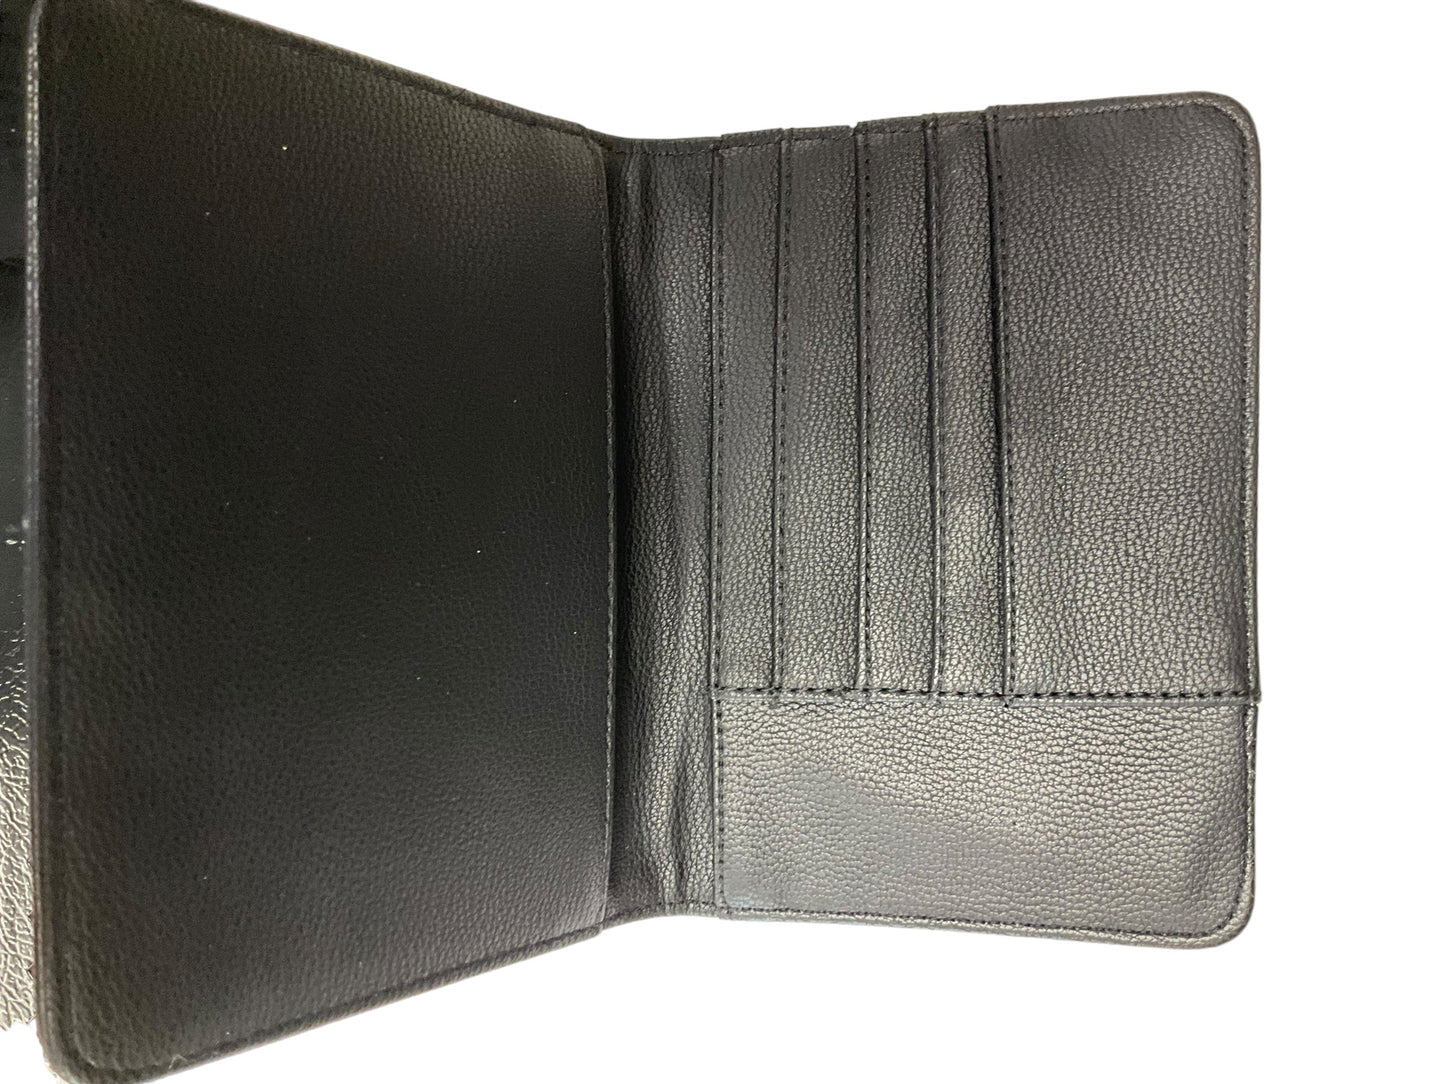 Wallet Guess, Size Small